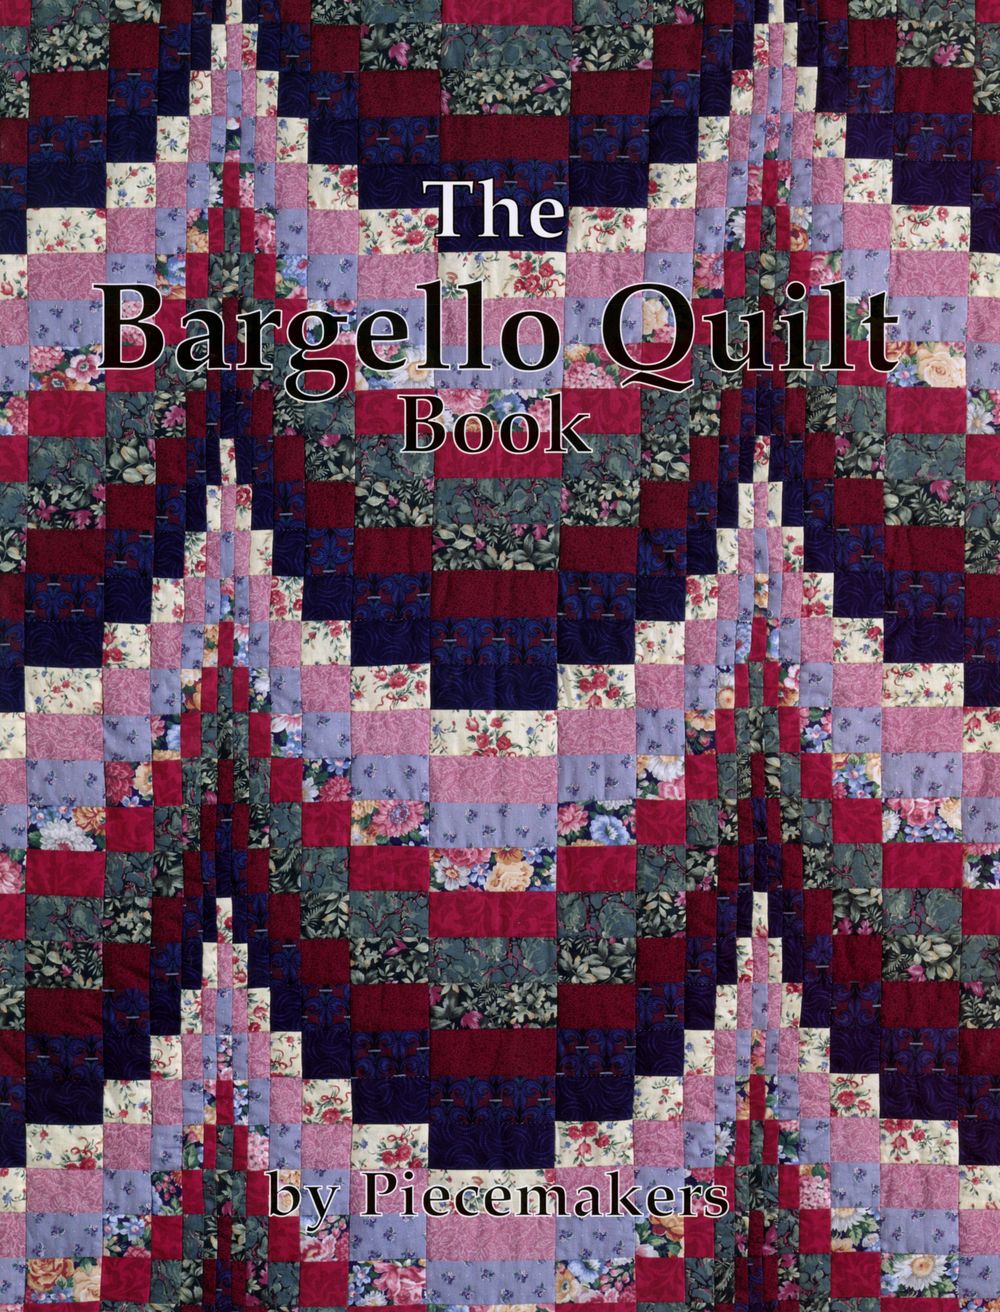 The Bargello Quilt Book by Piecemakers